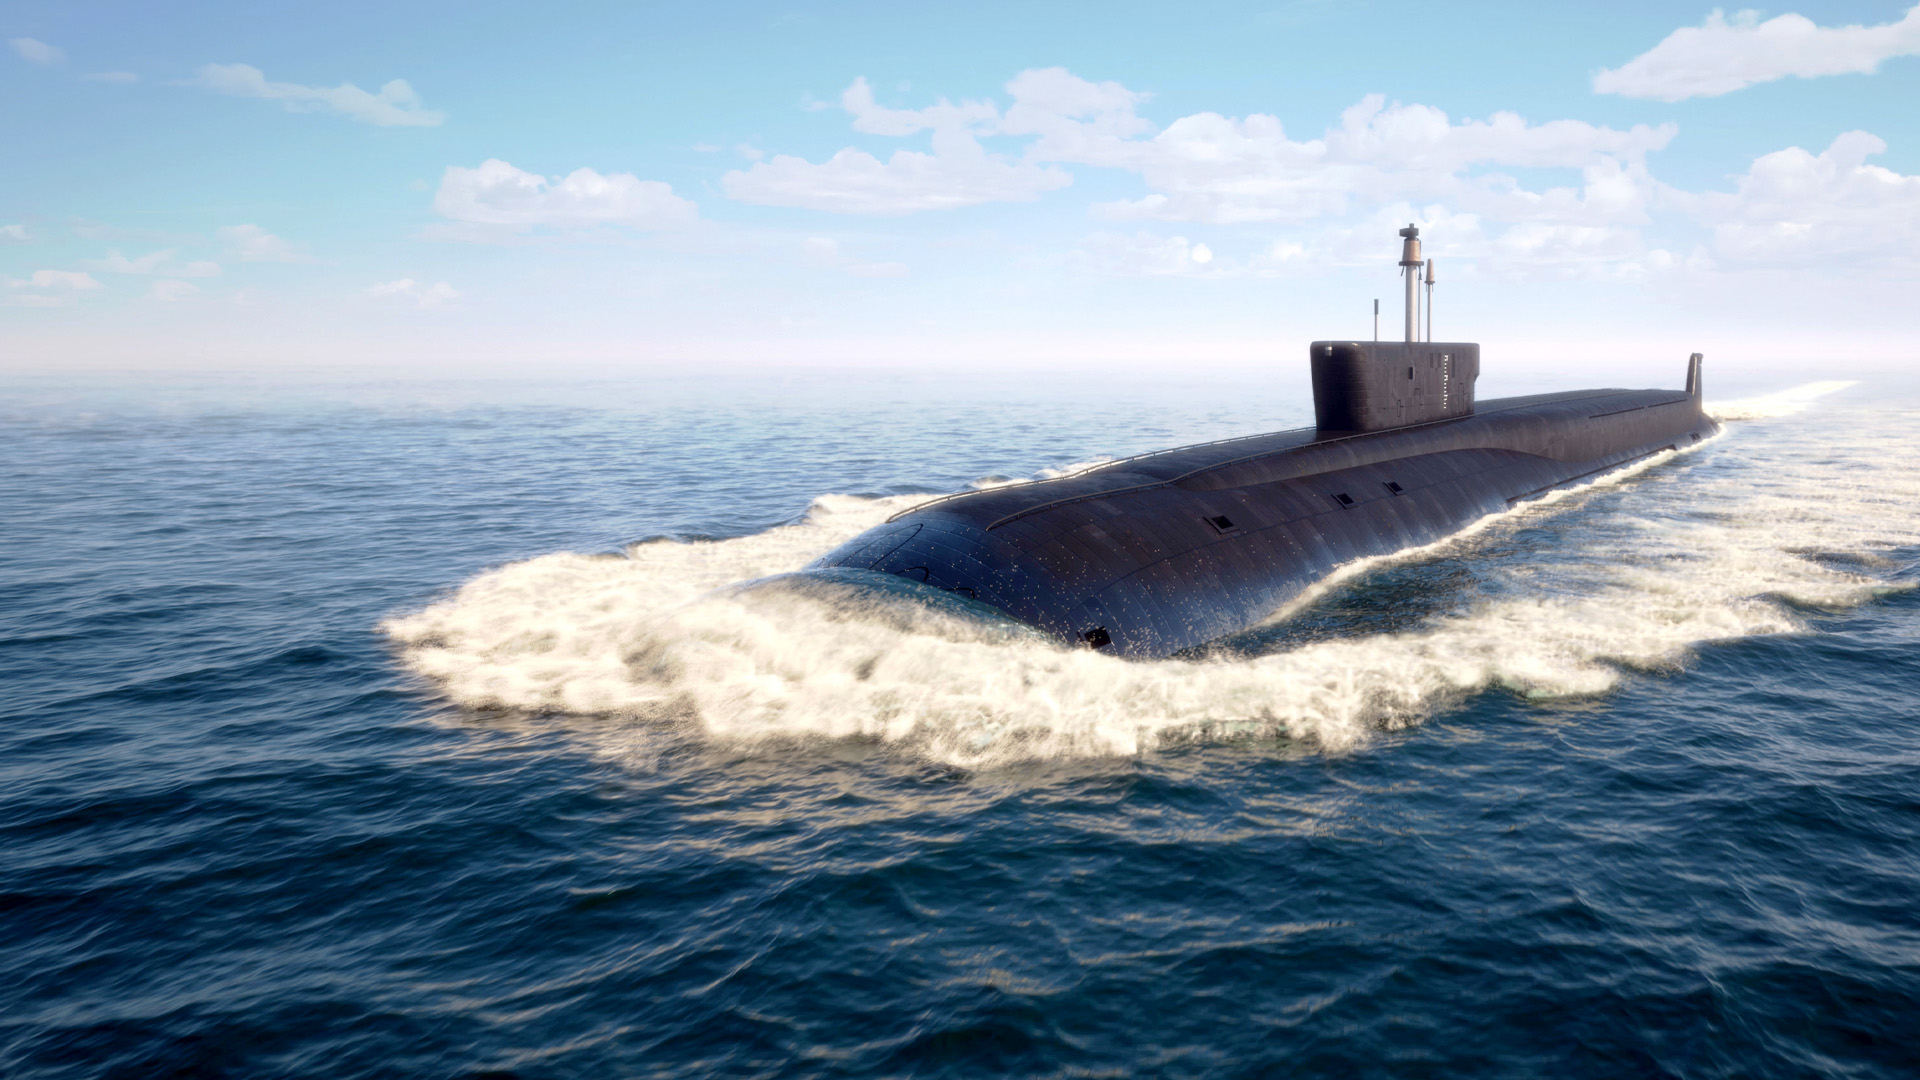 OSINT news roundup: Ukraine’s intelligence successes, China’s new sub and Indo-Pacific moves